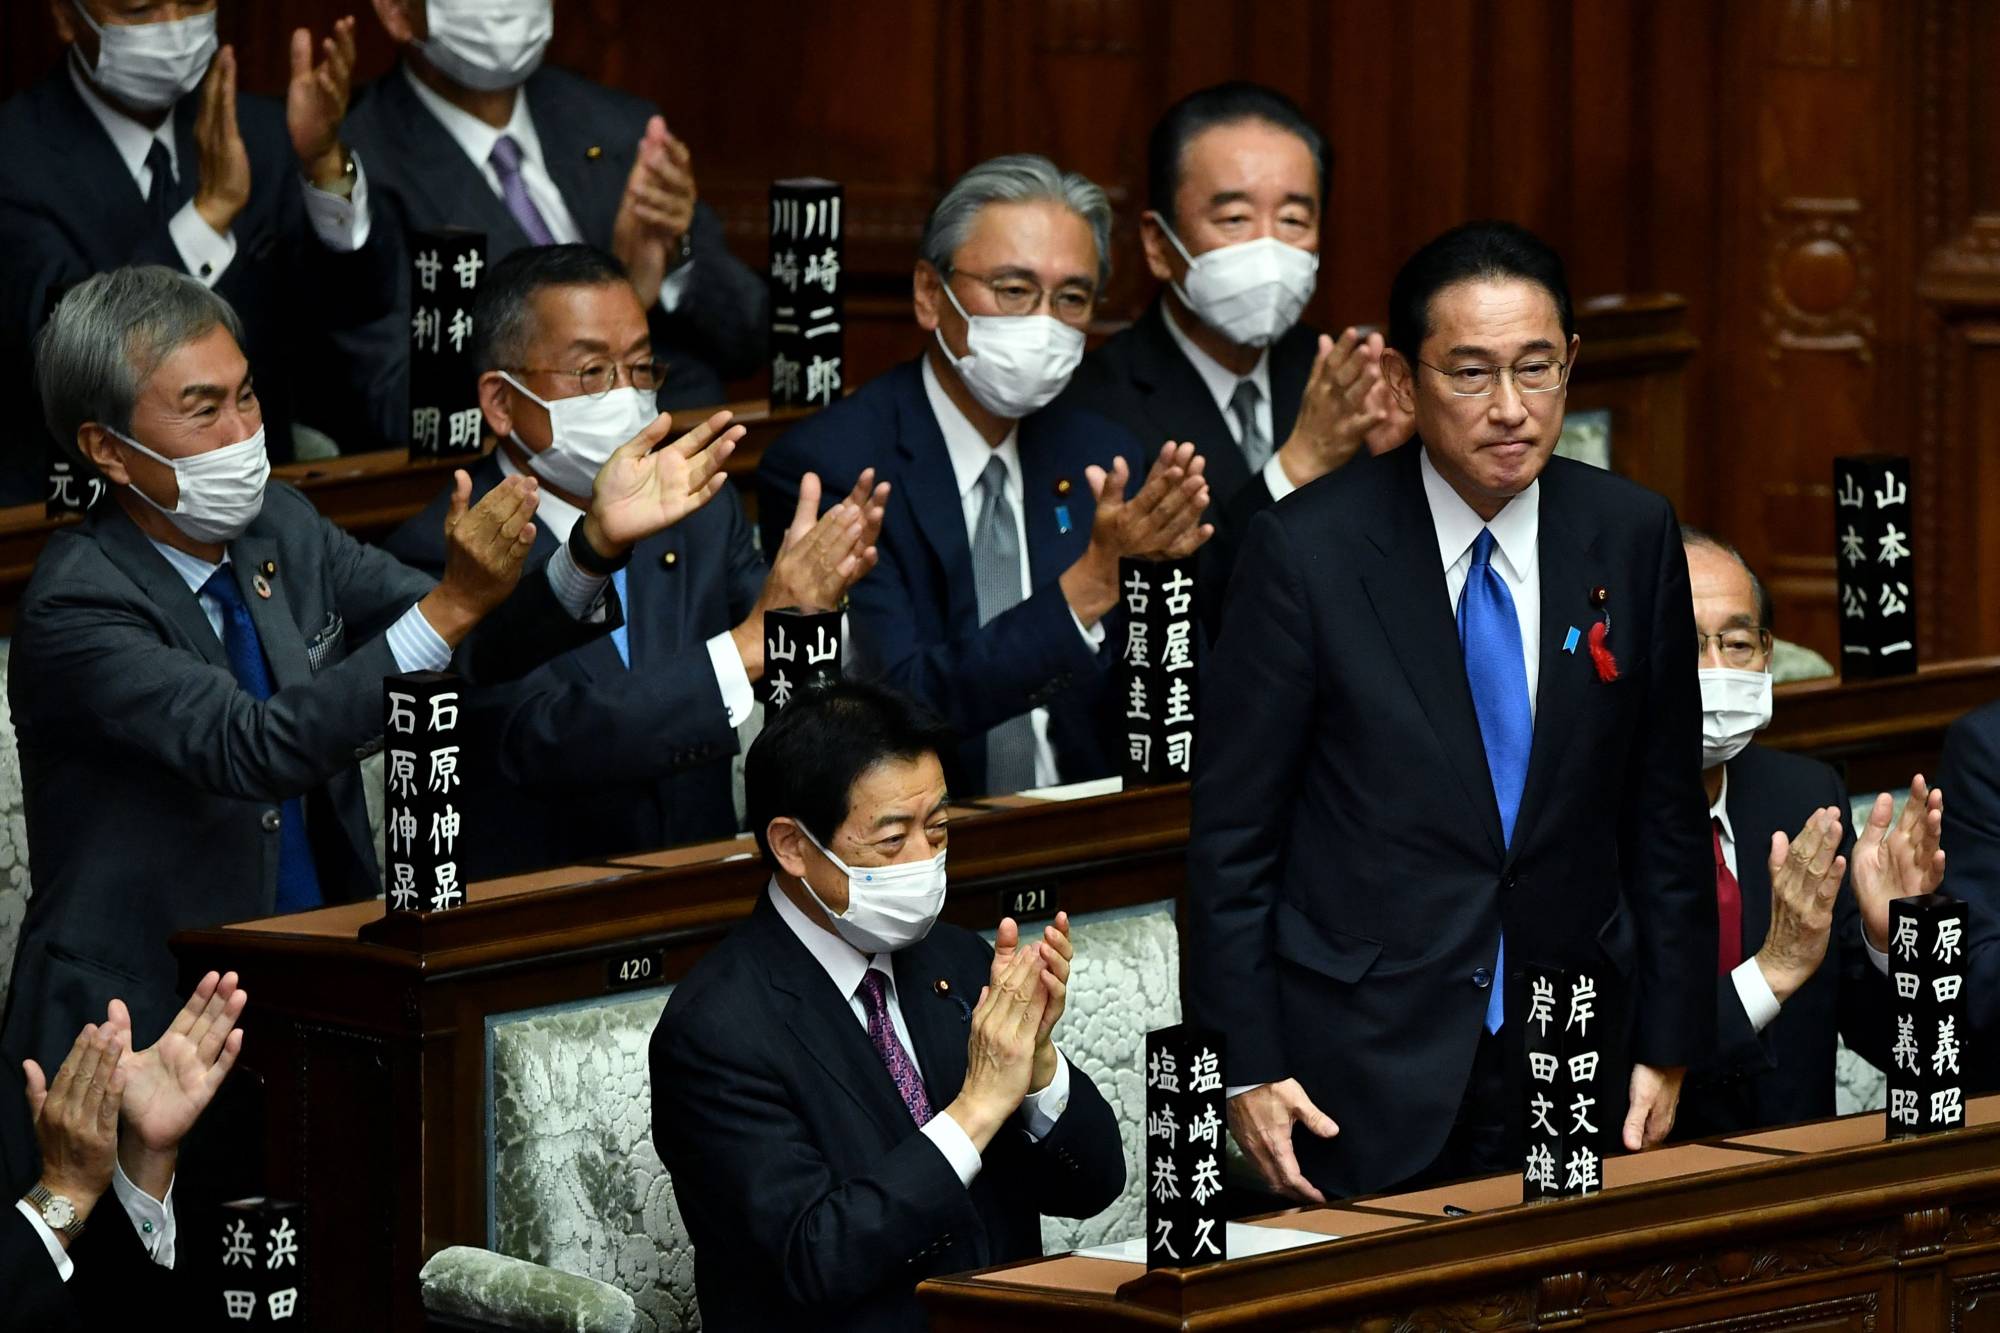 Liberal Democratic Party President Fumio Kishida is applauded after being elected prime minister in the Lower House in Tokyo on Monday. | AFP-JIJI